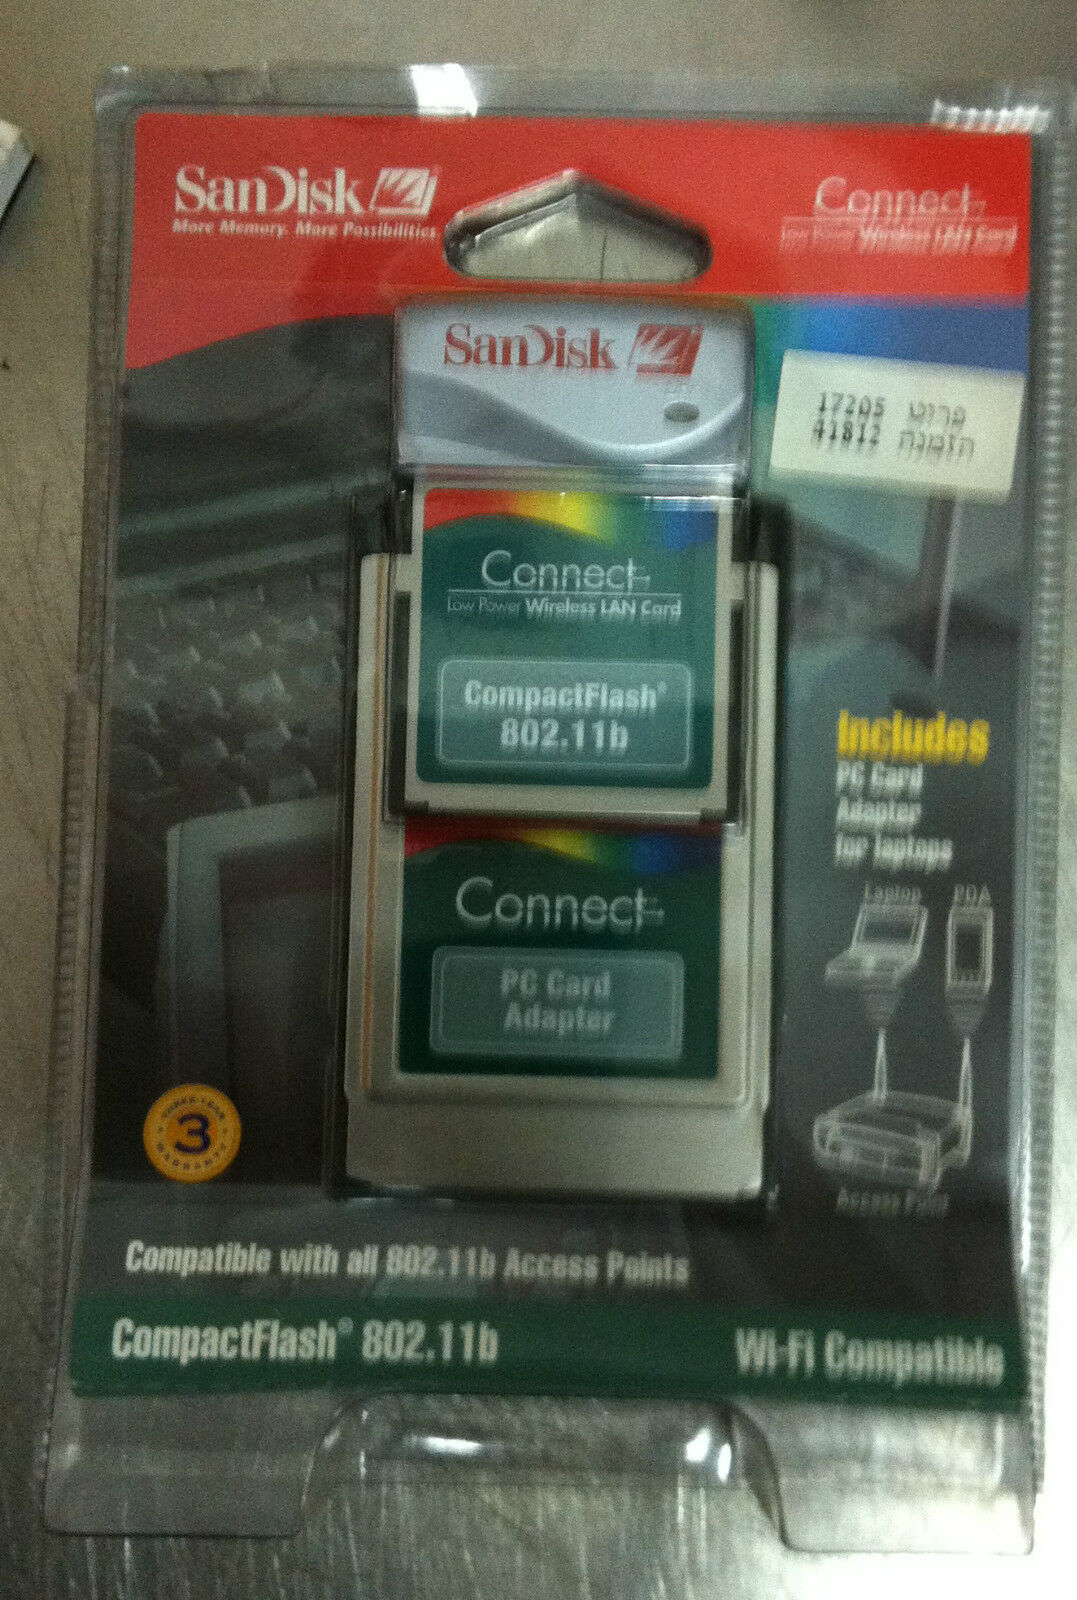 SanDisk Connect low power Wireless 802.11B FC Card w/Adapter SDWCFB-000-485 NEW